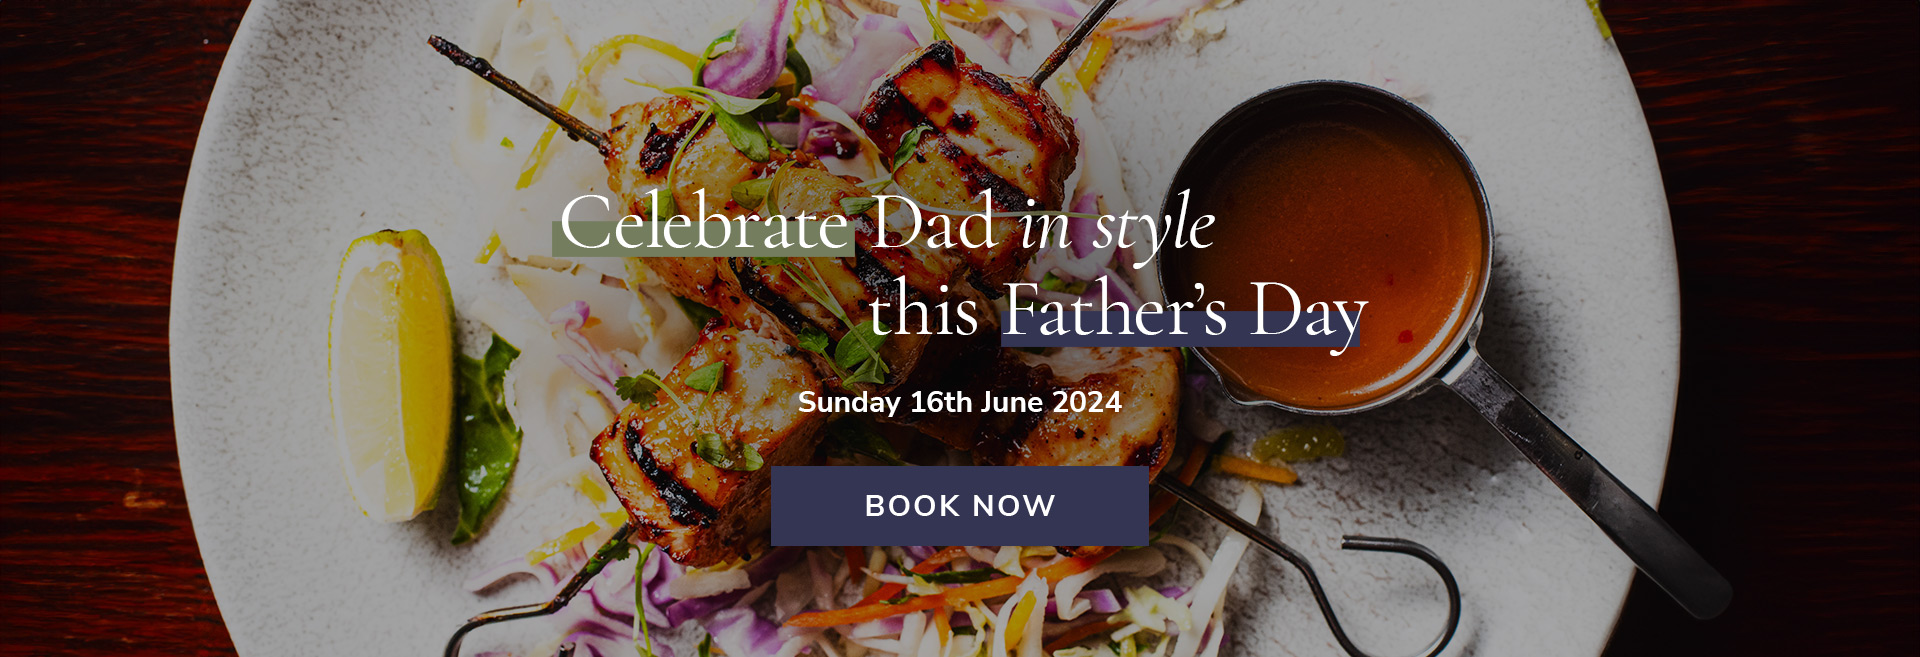 Father's Day at The Castle Holland Park